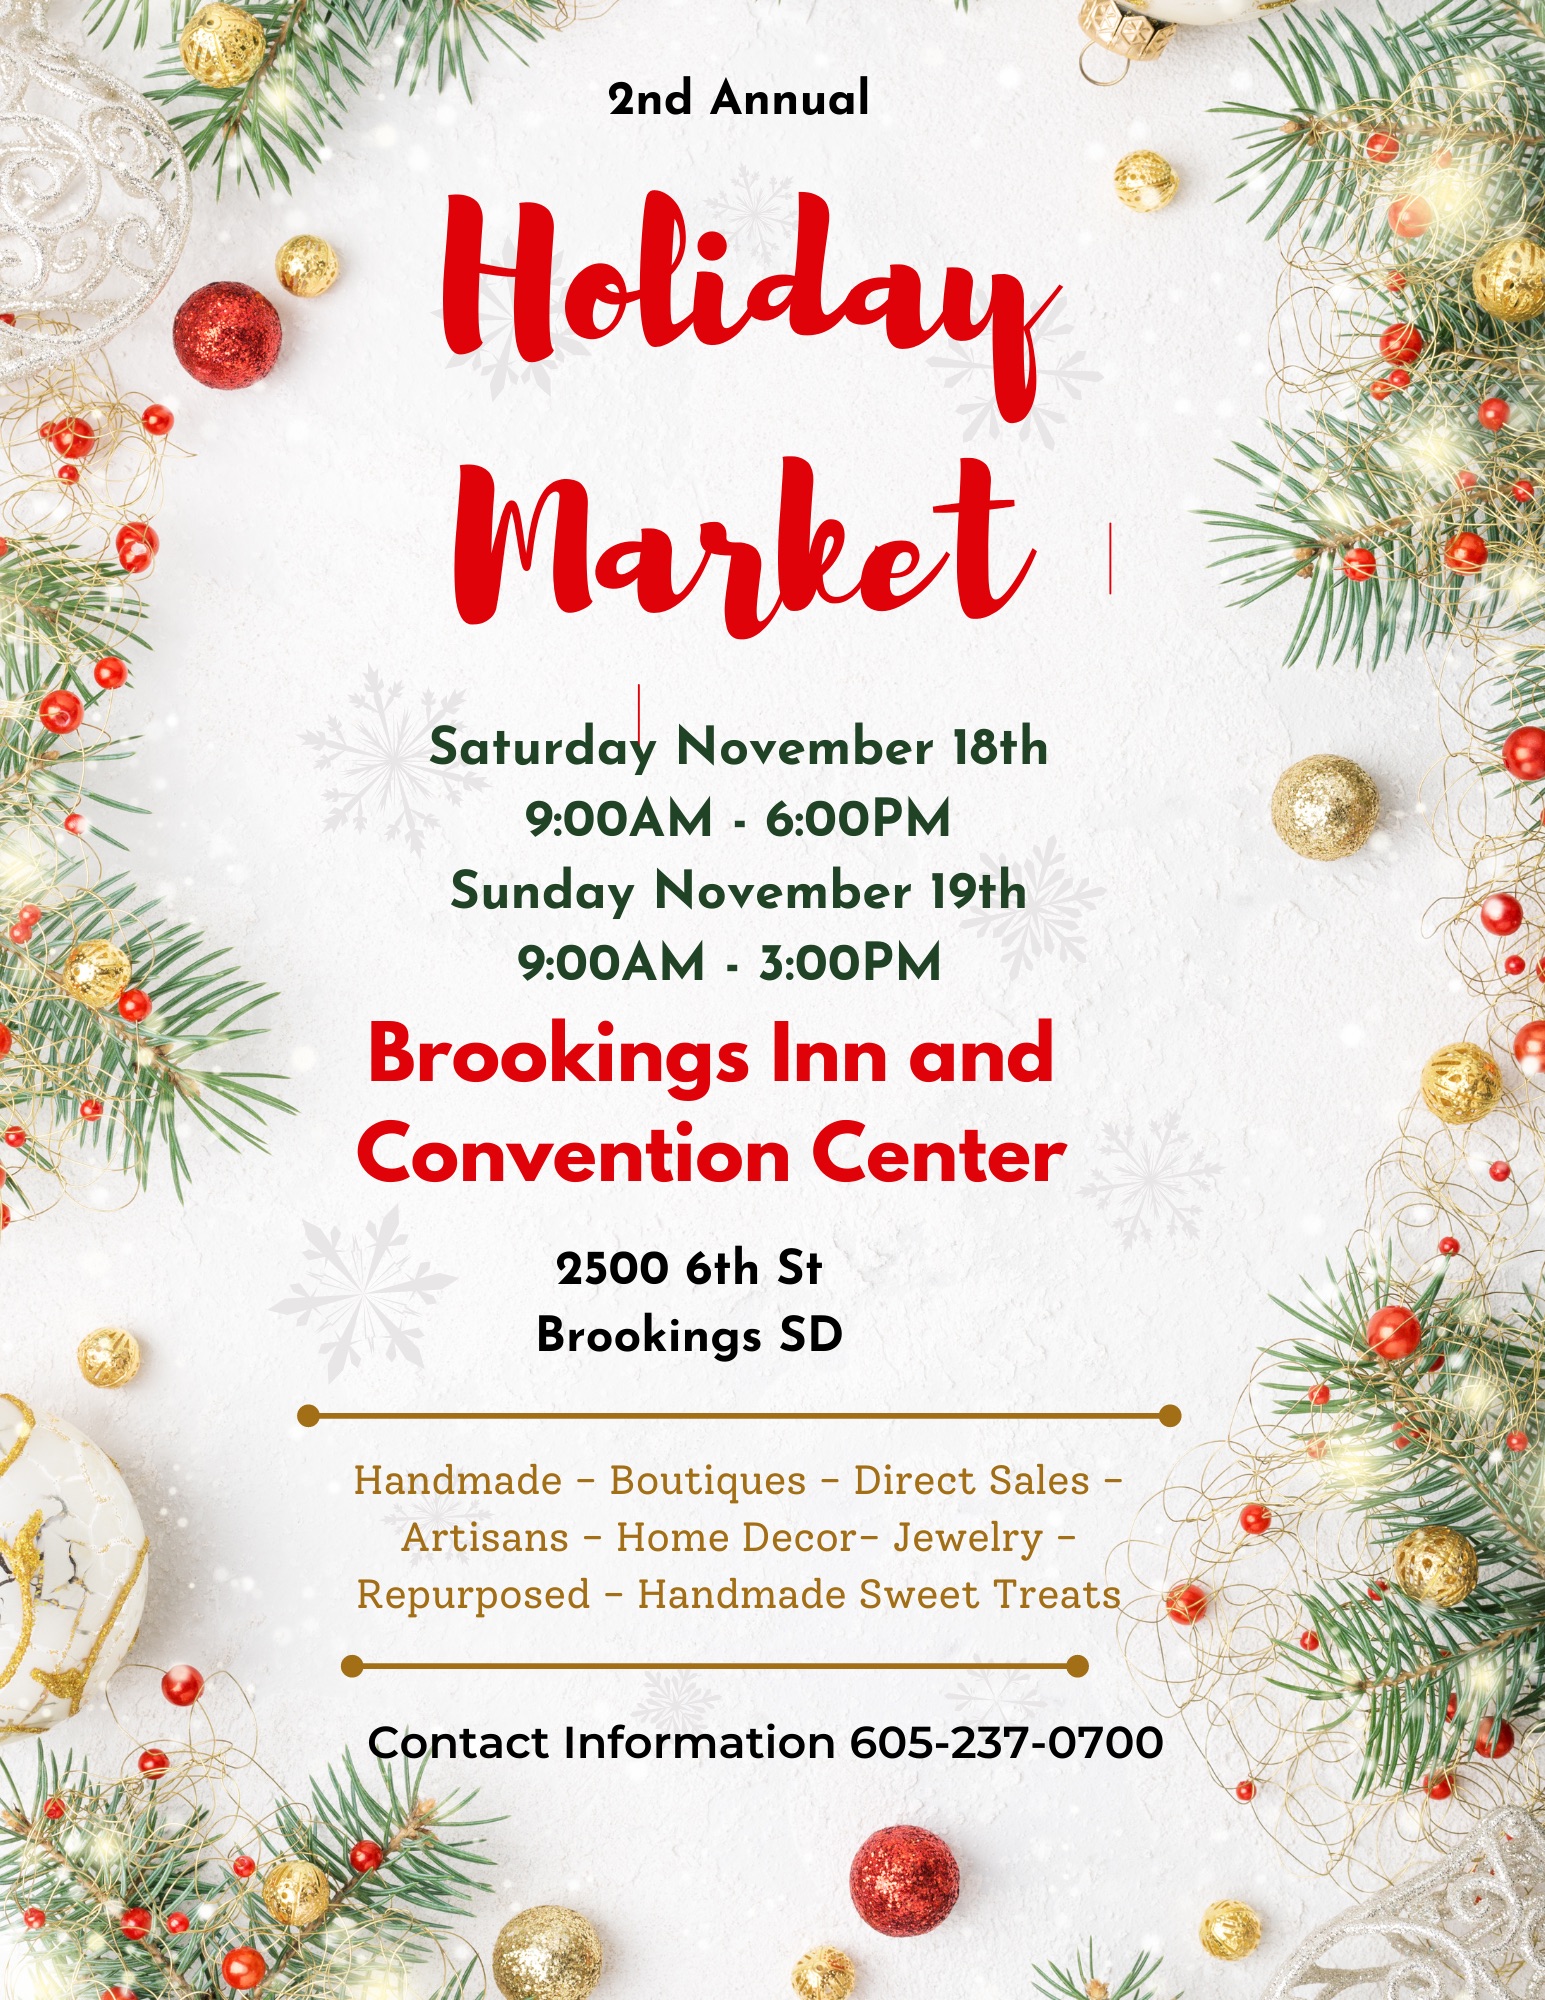 Holiday Market (2nd Annual)